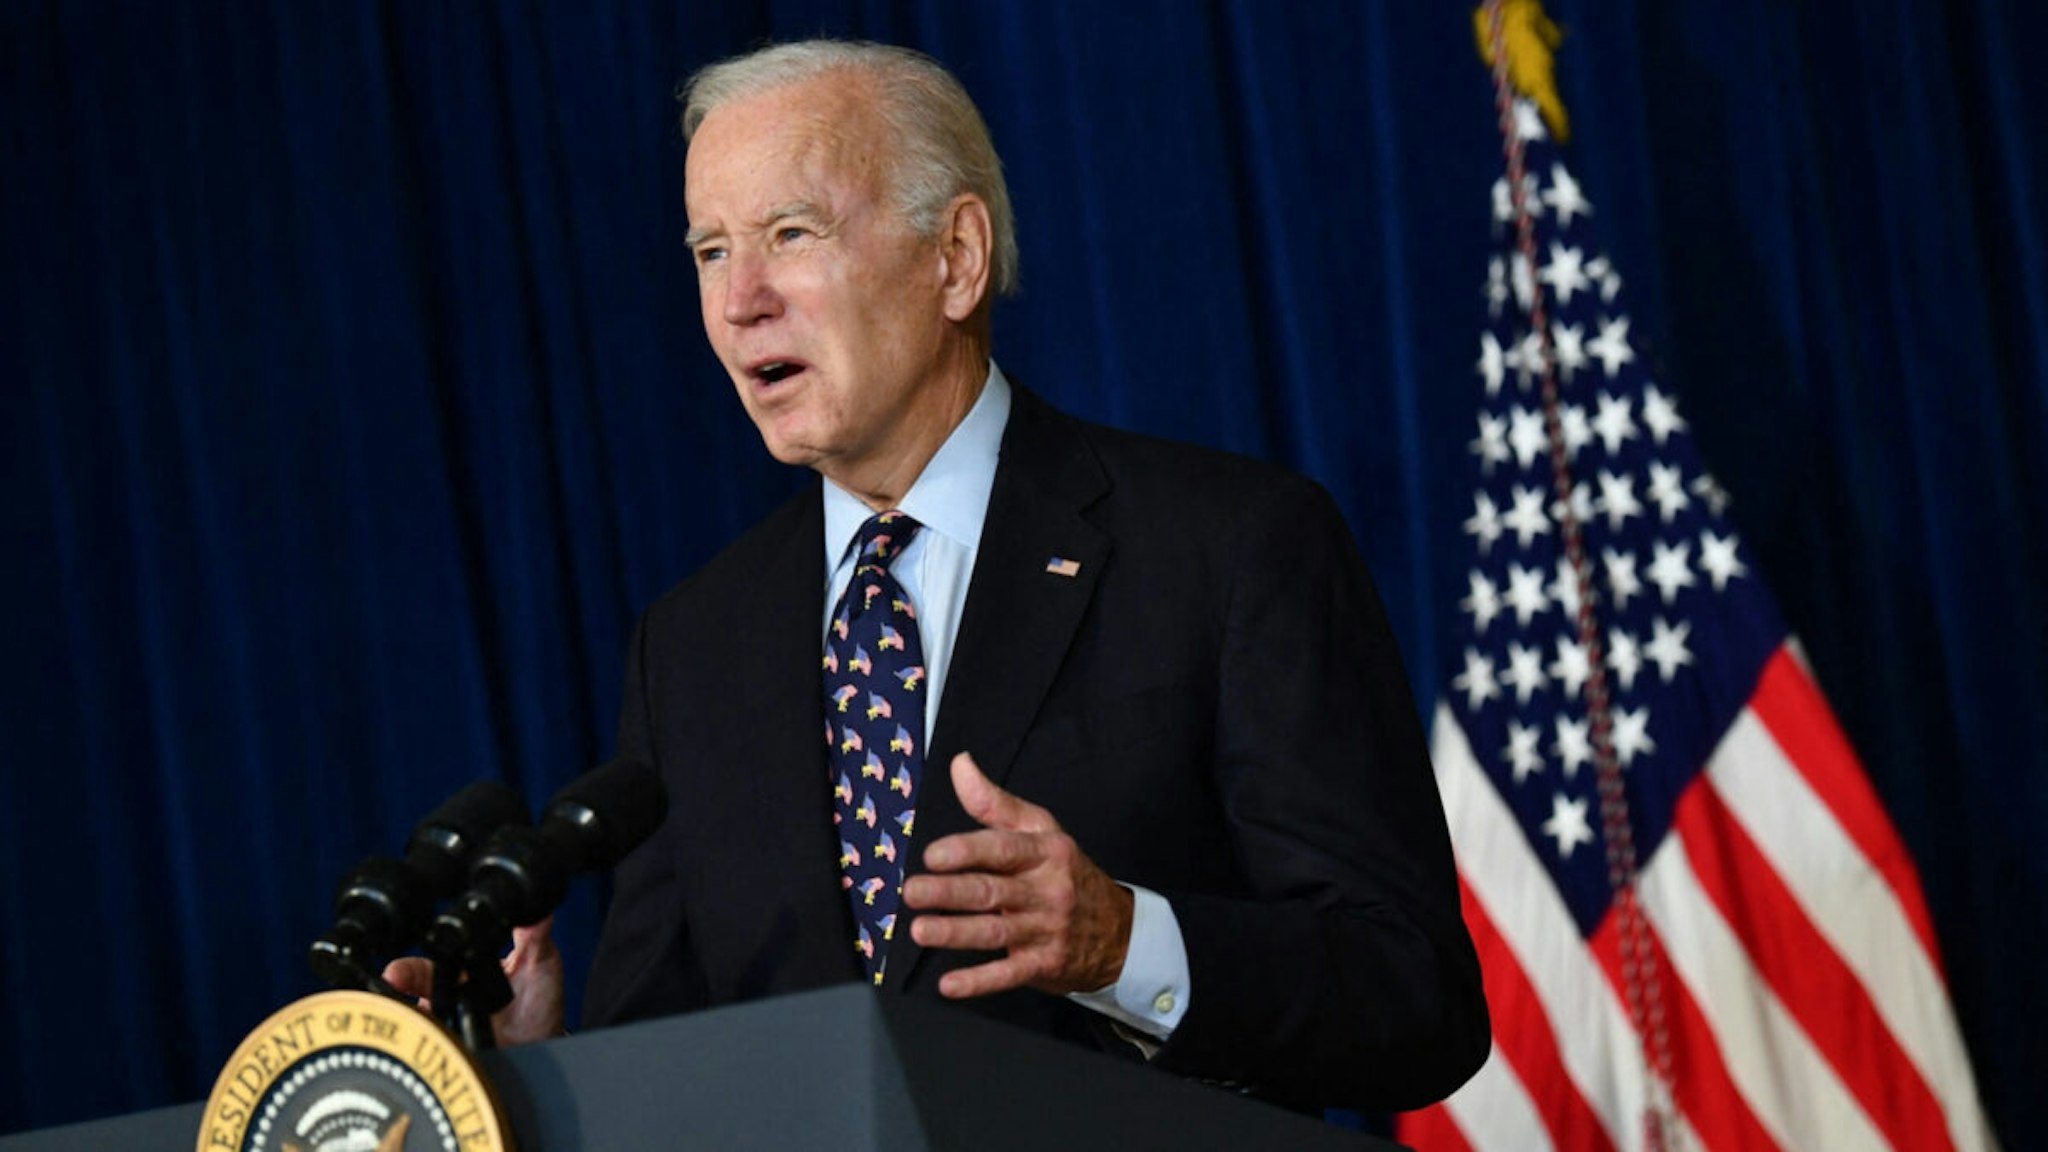 US President Joe Biden speaks about the tornados which swept across the US, in Wilmington, Delaware on December 11, 2021.